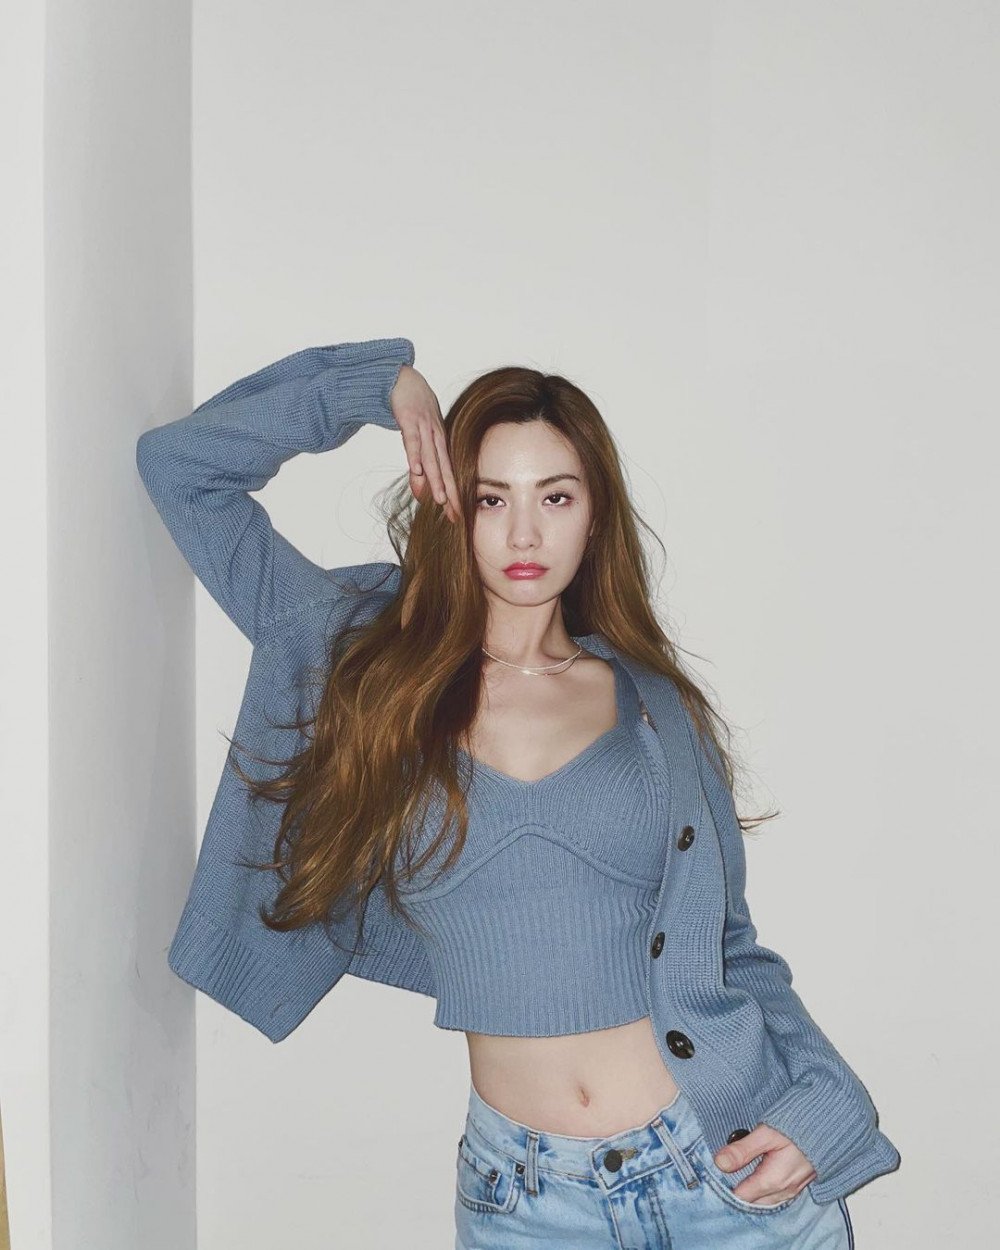 Netizens are mesmerized by Nana's perfect figure